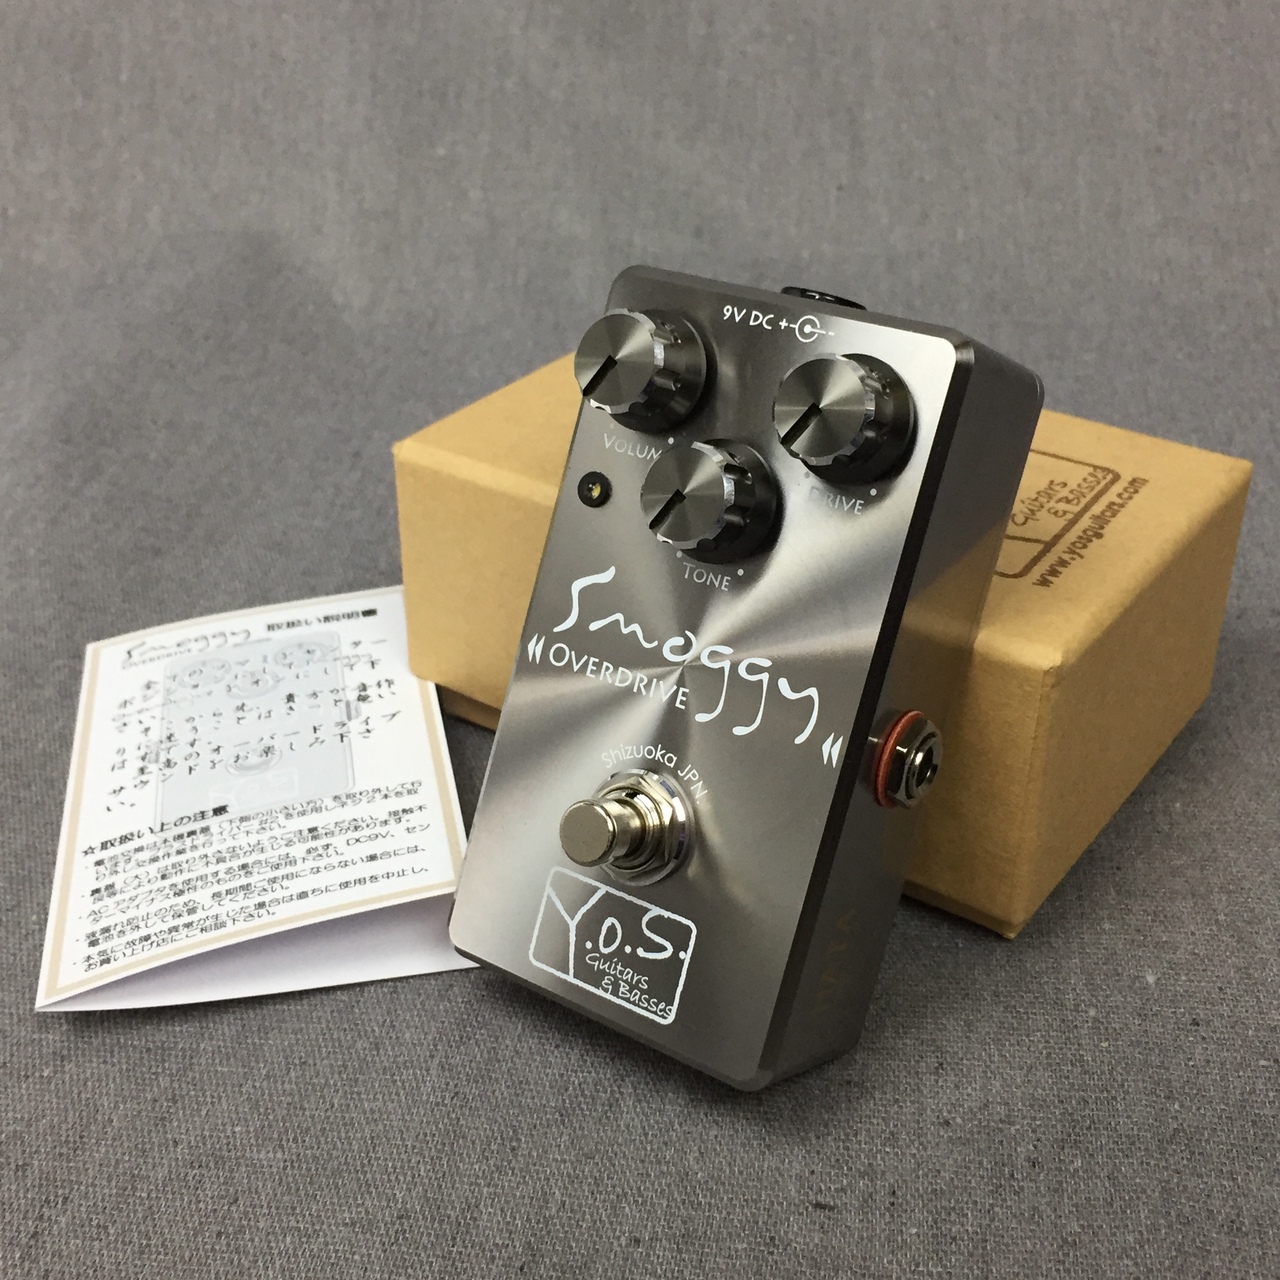 Y.O.S.ギター工房 Smoggy Overdrive 買取ました #船橋 #買取 #LINE 